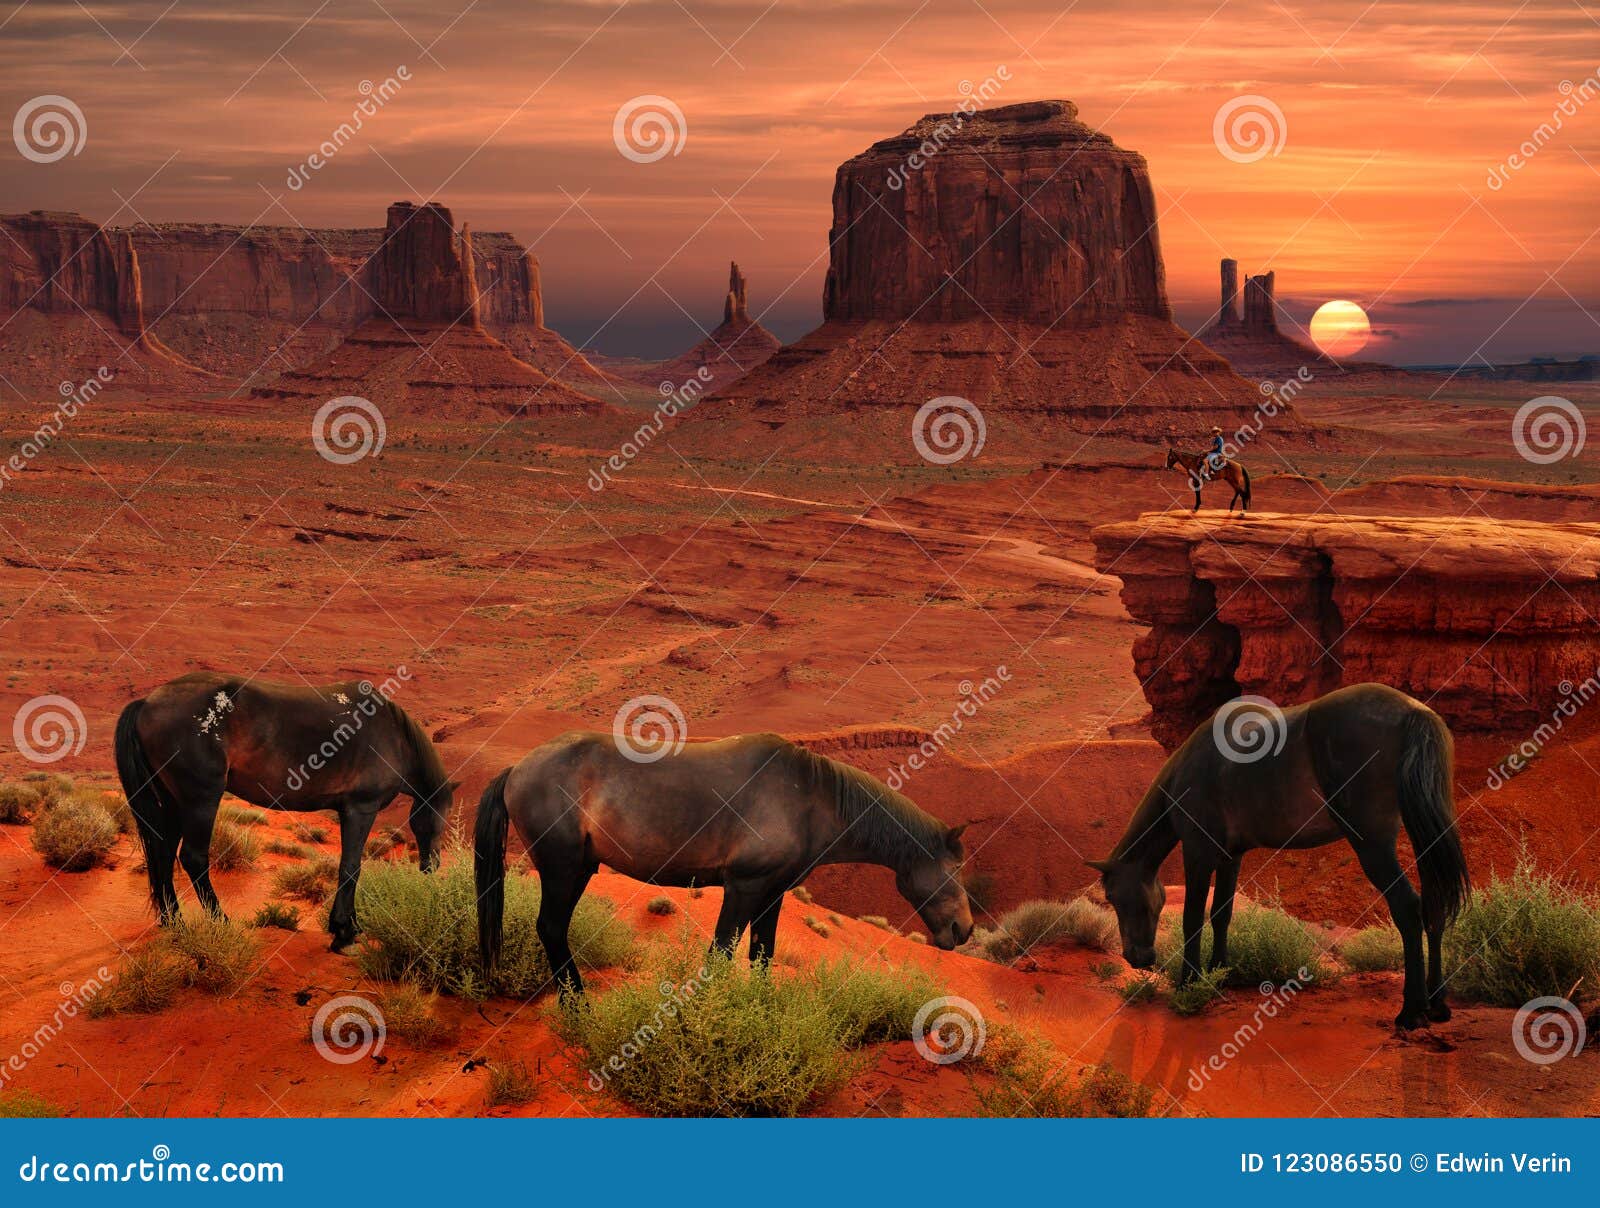 horses at john ford`s point overlook in monument valley tribal park, arizona usa